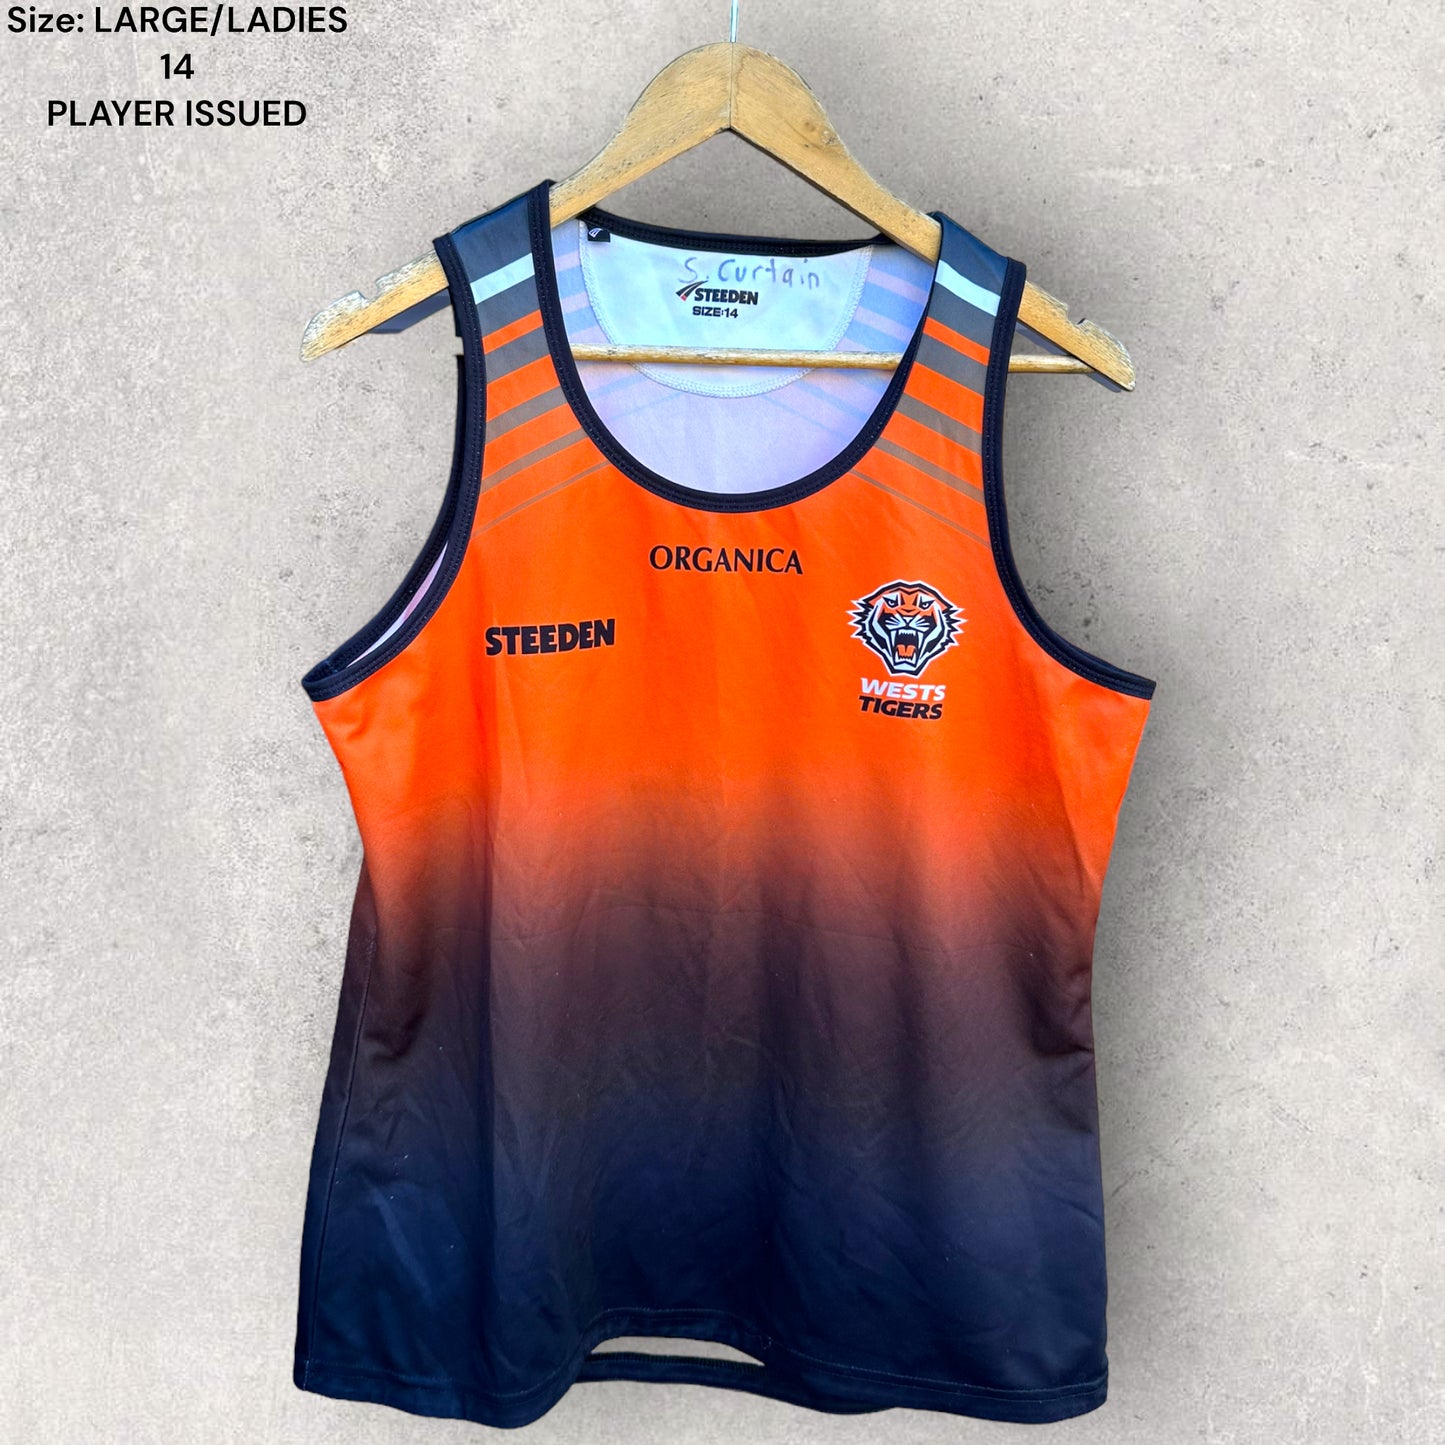 WESTS TIGERS SOPHIE CURTAIN NRLW PLAYER ISSUED SINGLET